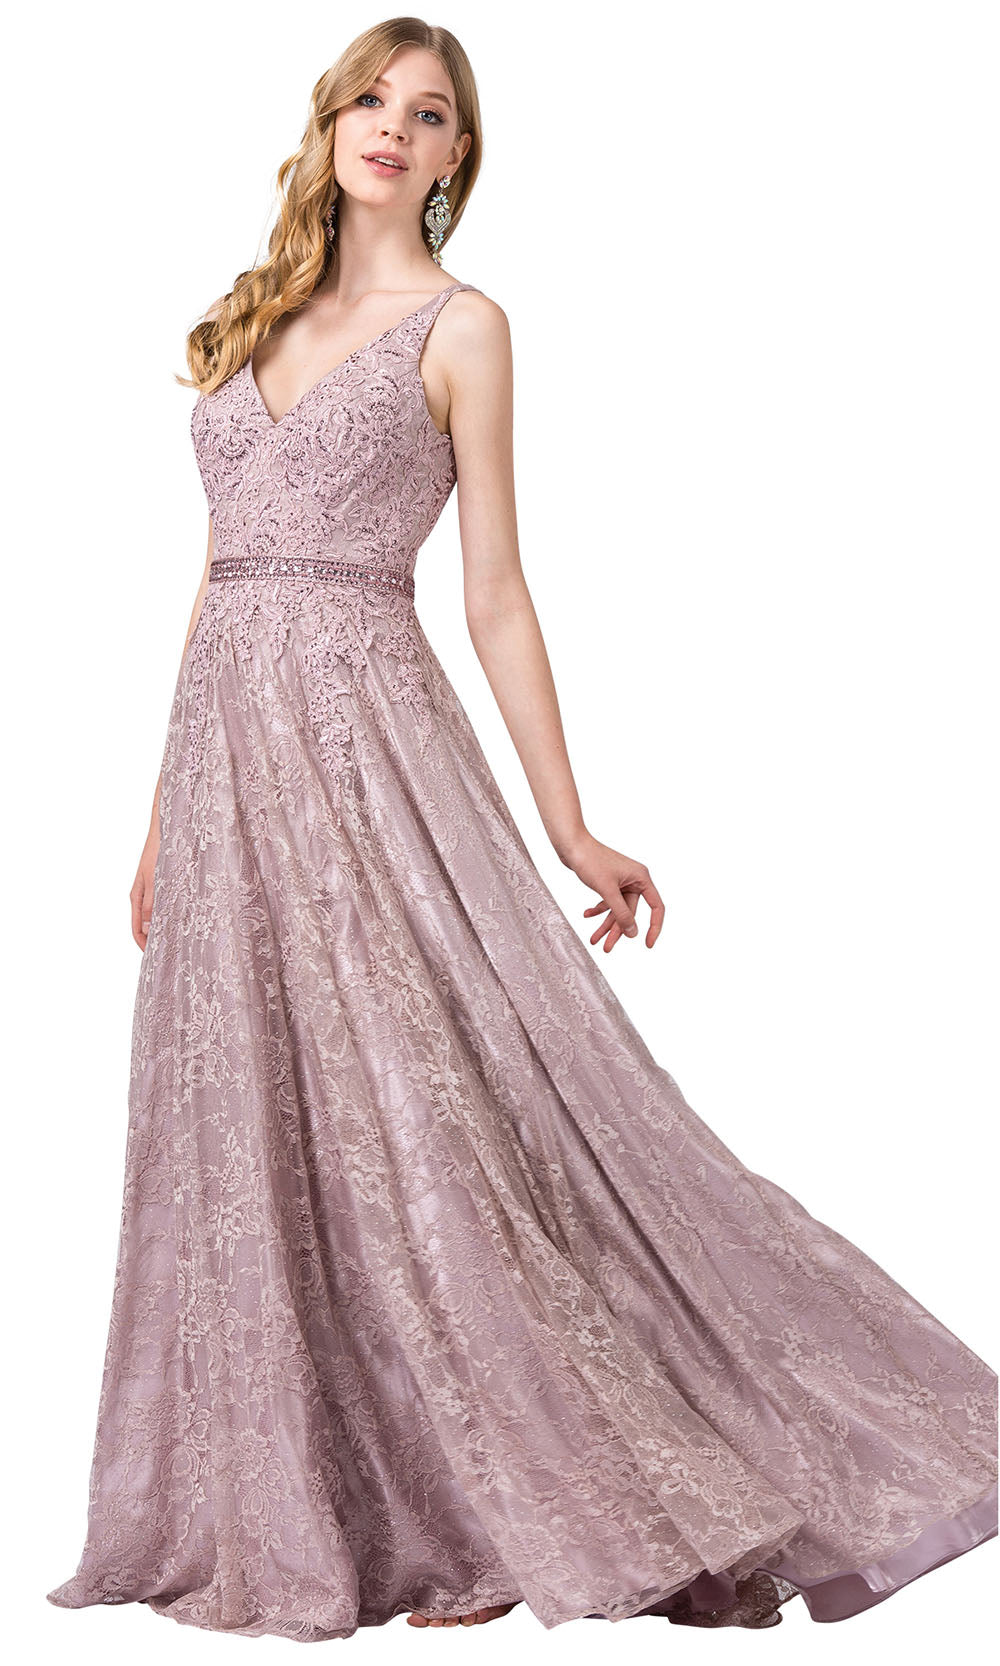 Dancing Queen - 2646 Floral Embroidered A-Line Prom Dress In Purple